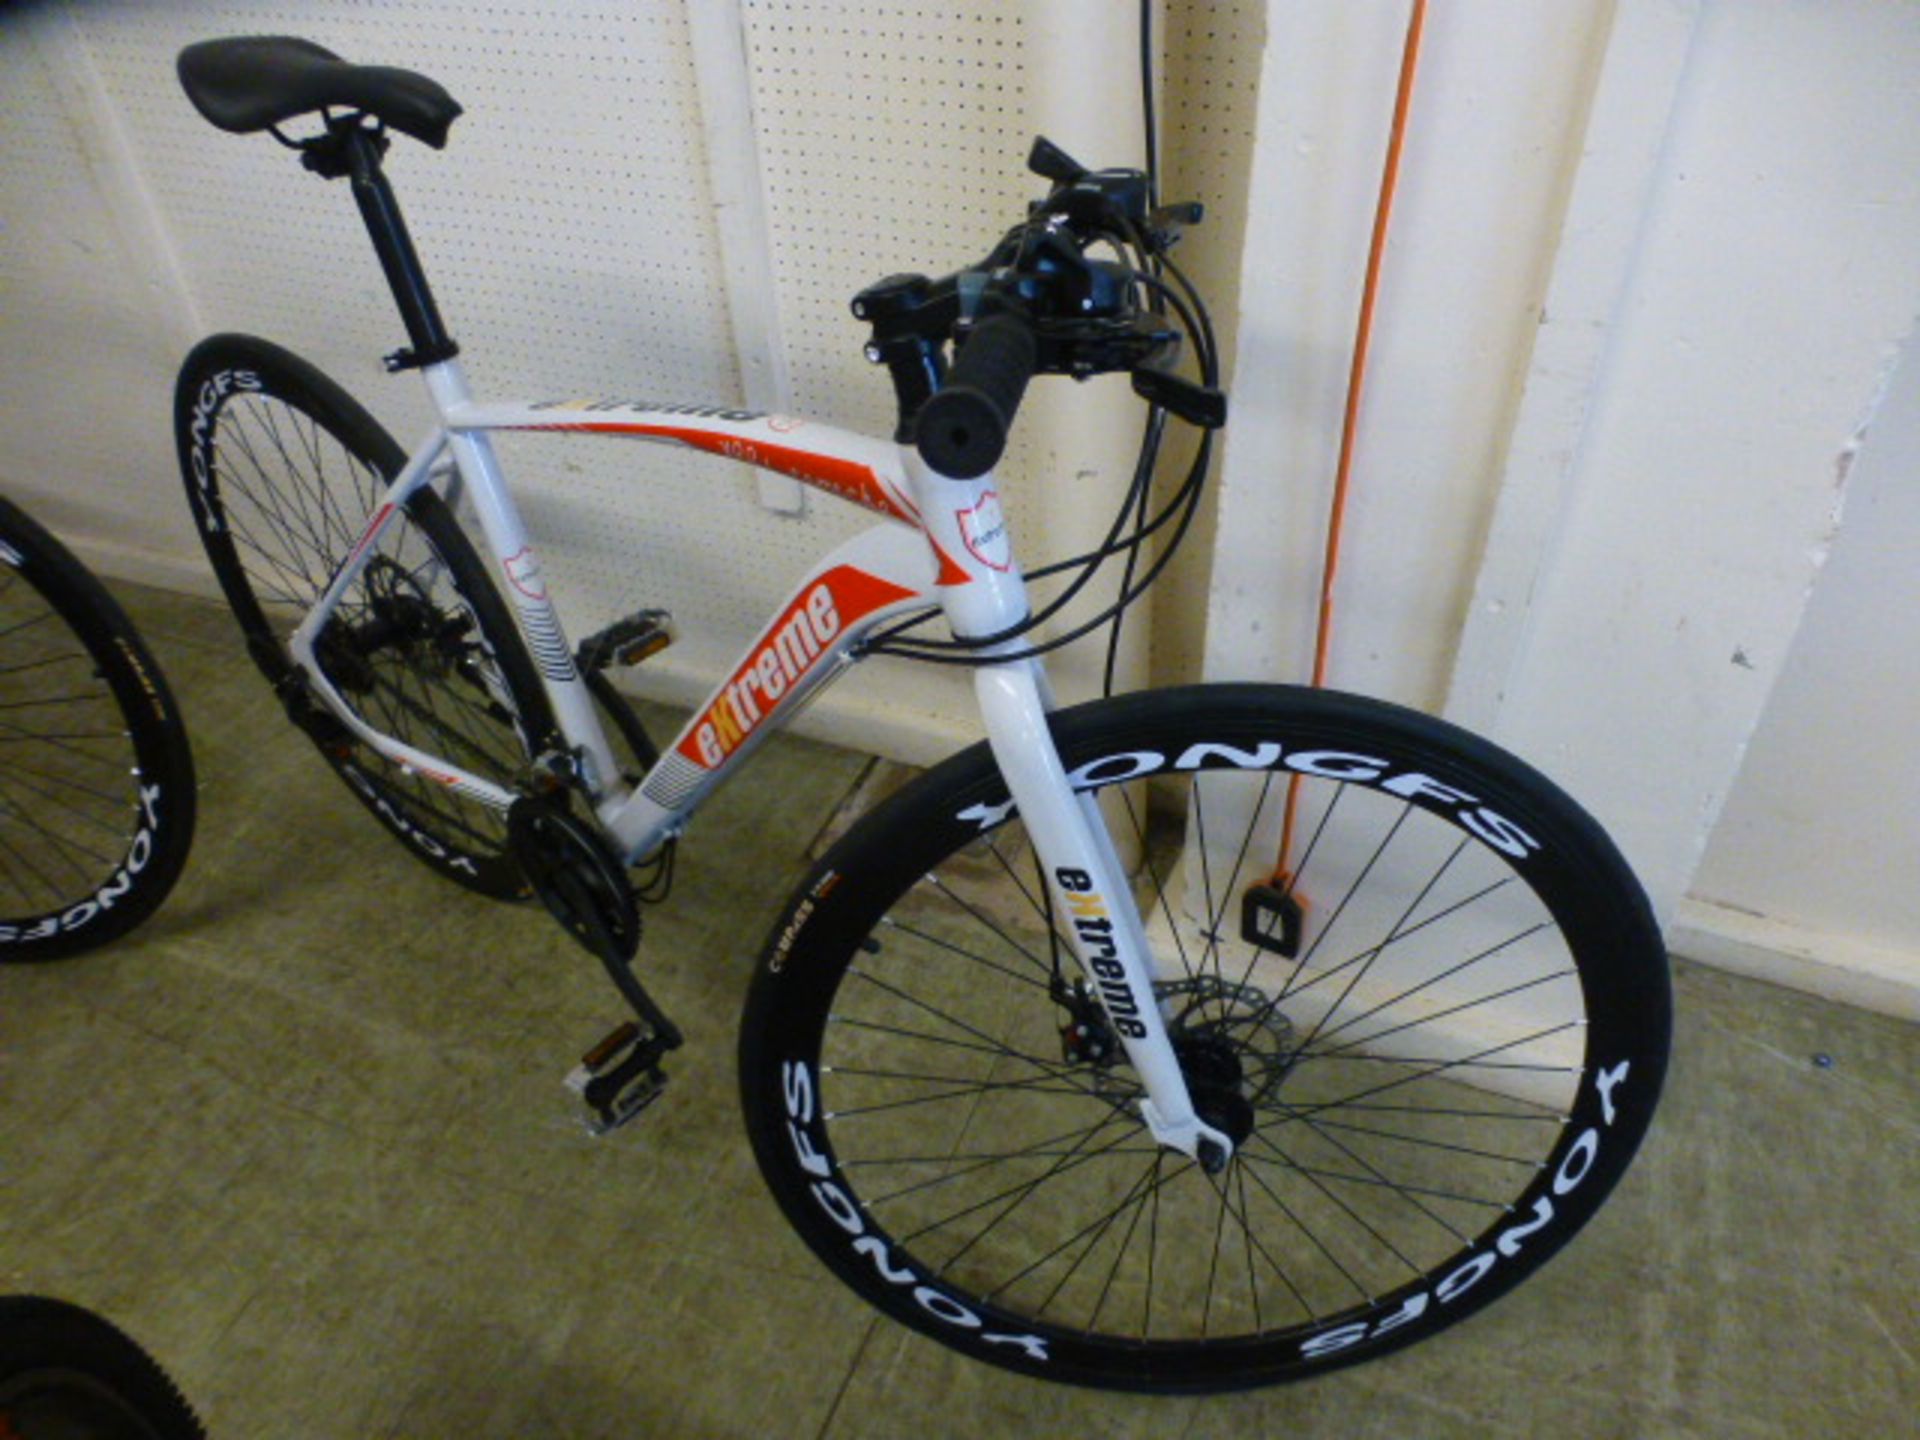 An Extreme white/red road bike with Shimano gears and 700c wheels